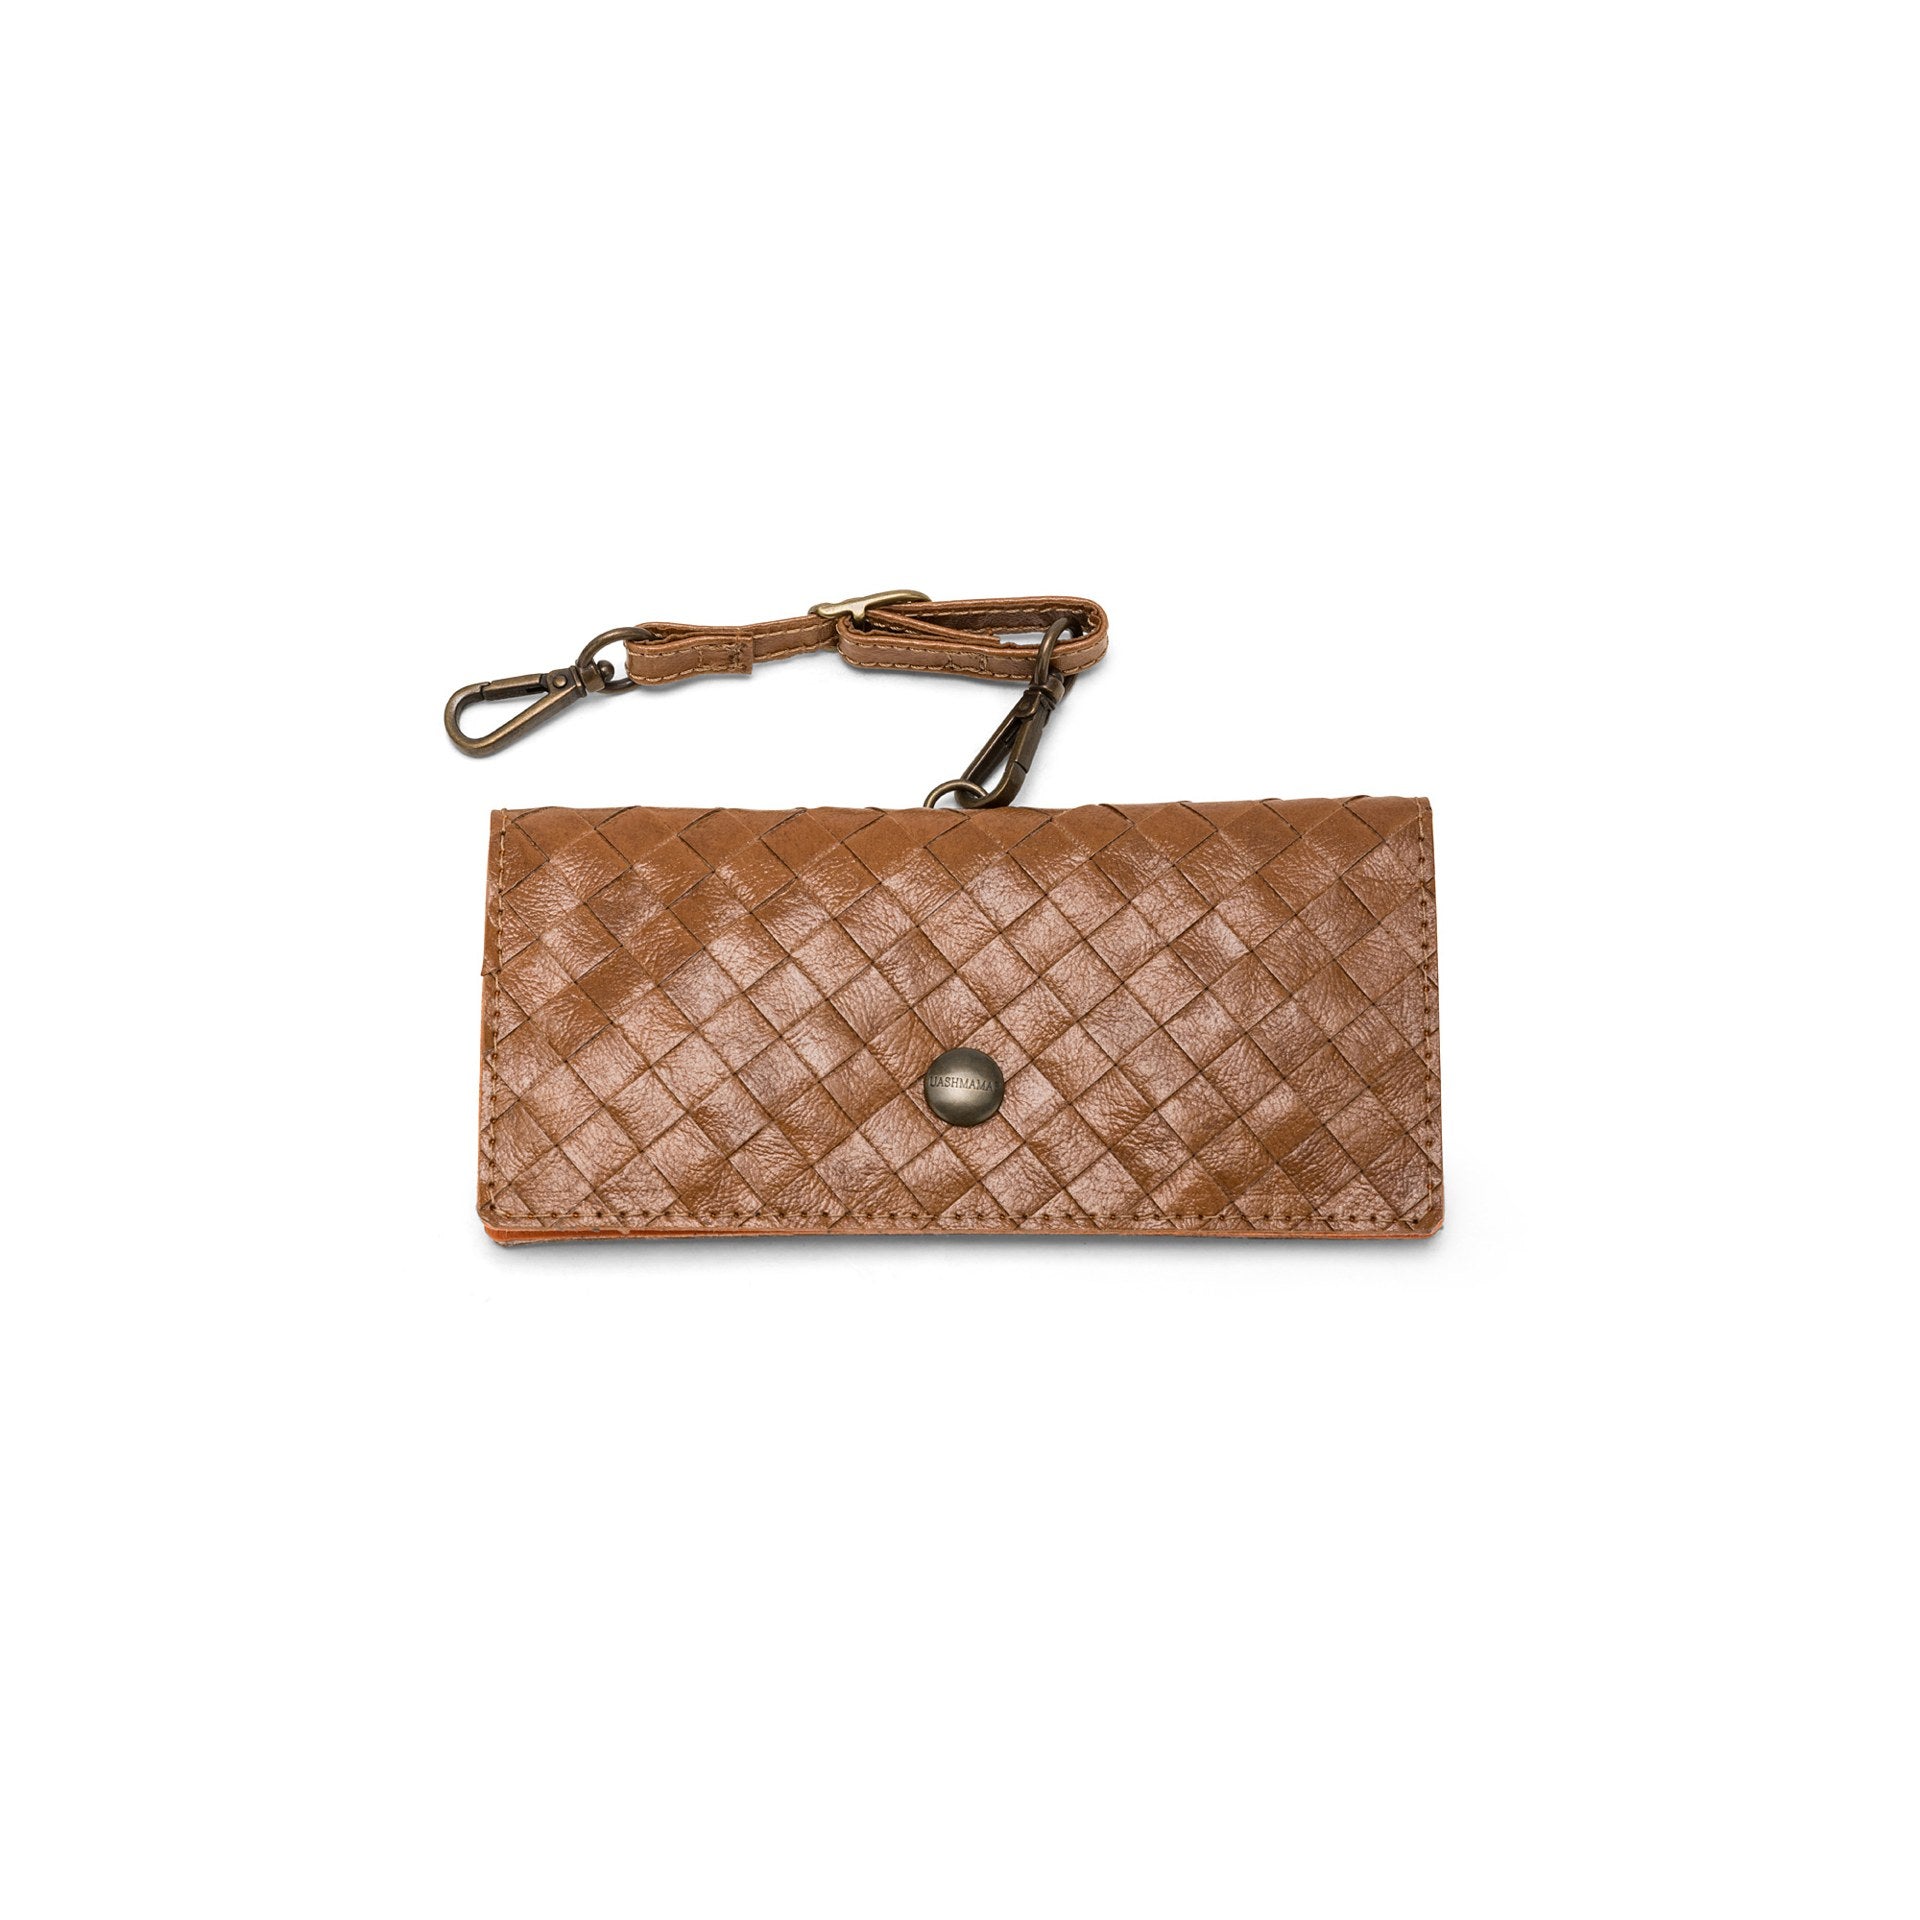 A mid brown woven washable paper glasses case is shown, with a metal stud closure and a washable paper strap attachment.